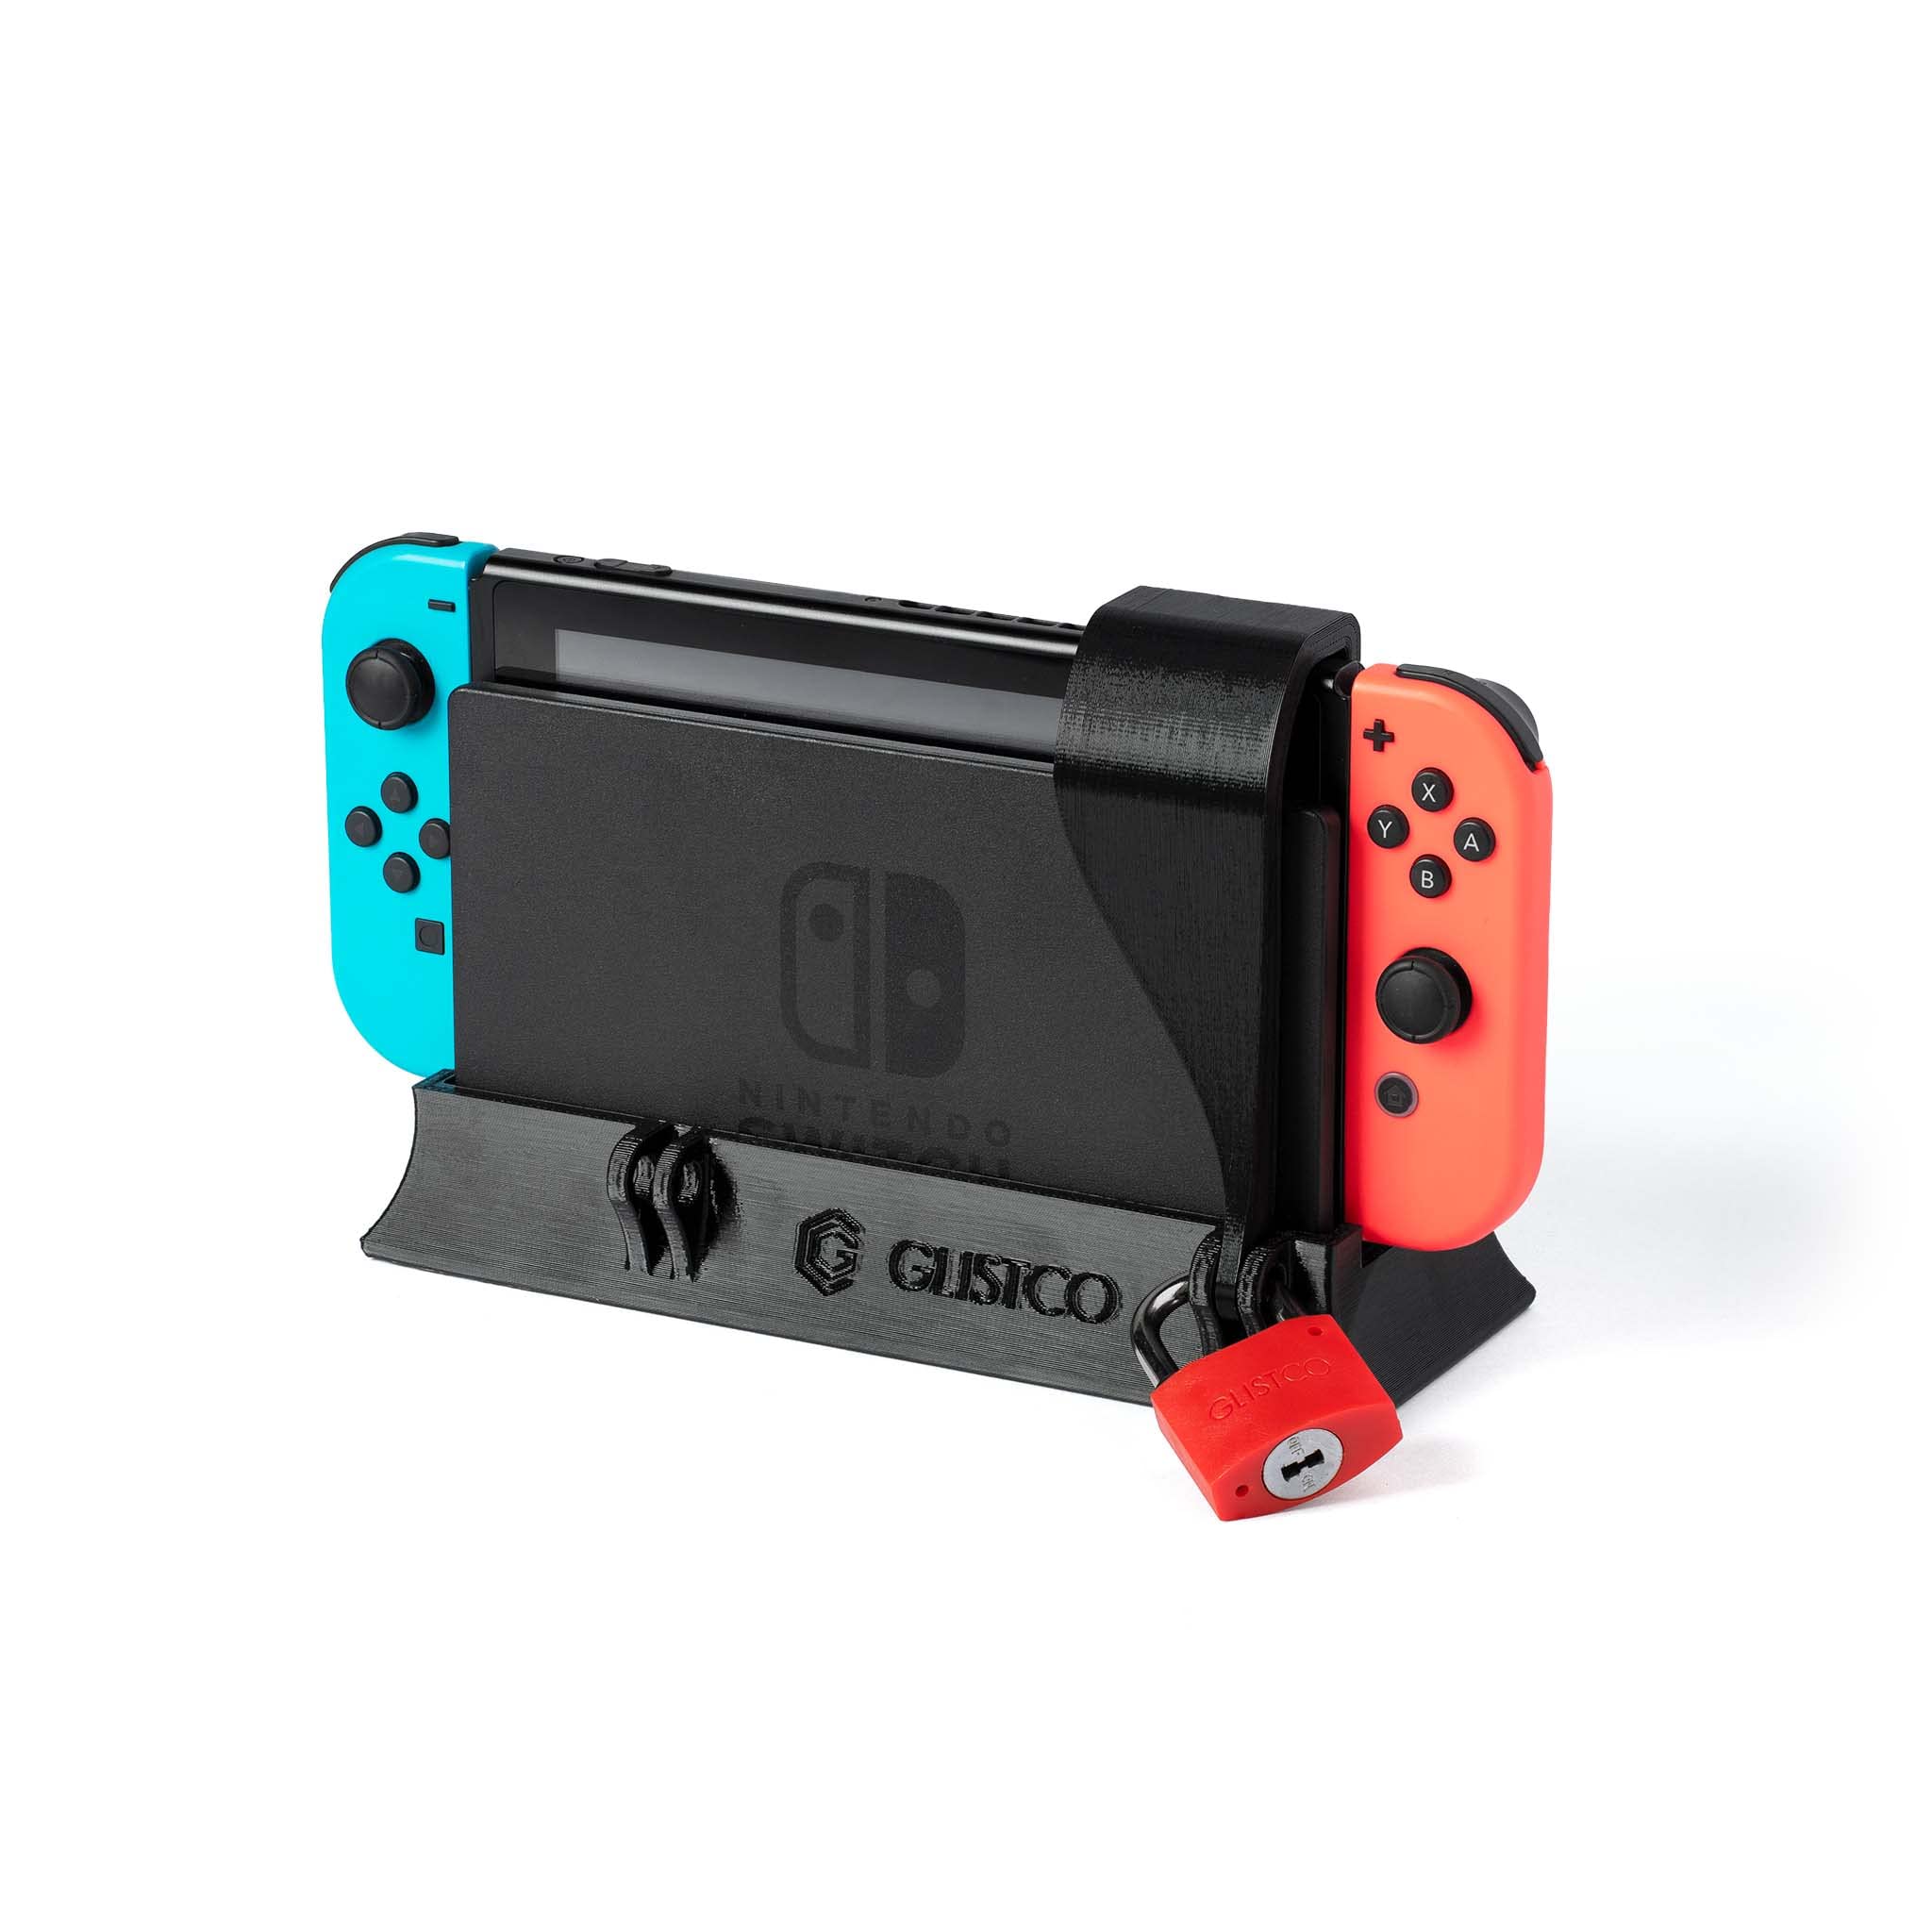 Securely locks the Nintendo Switch Dock in place
Prevents accidental disconnection